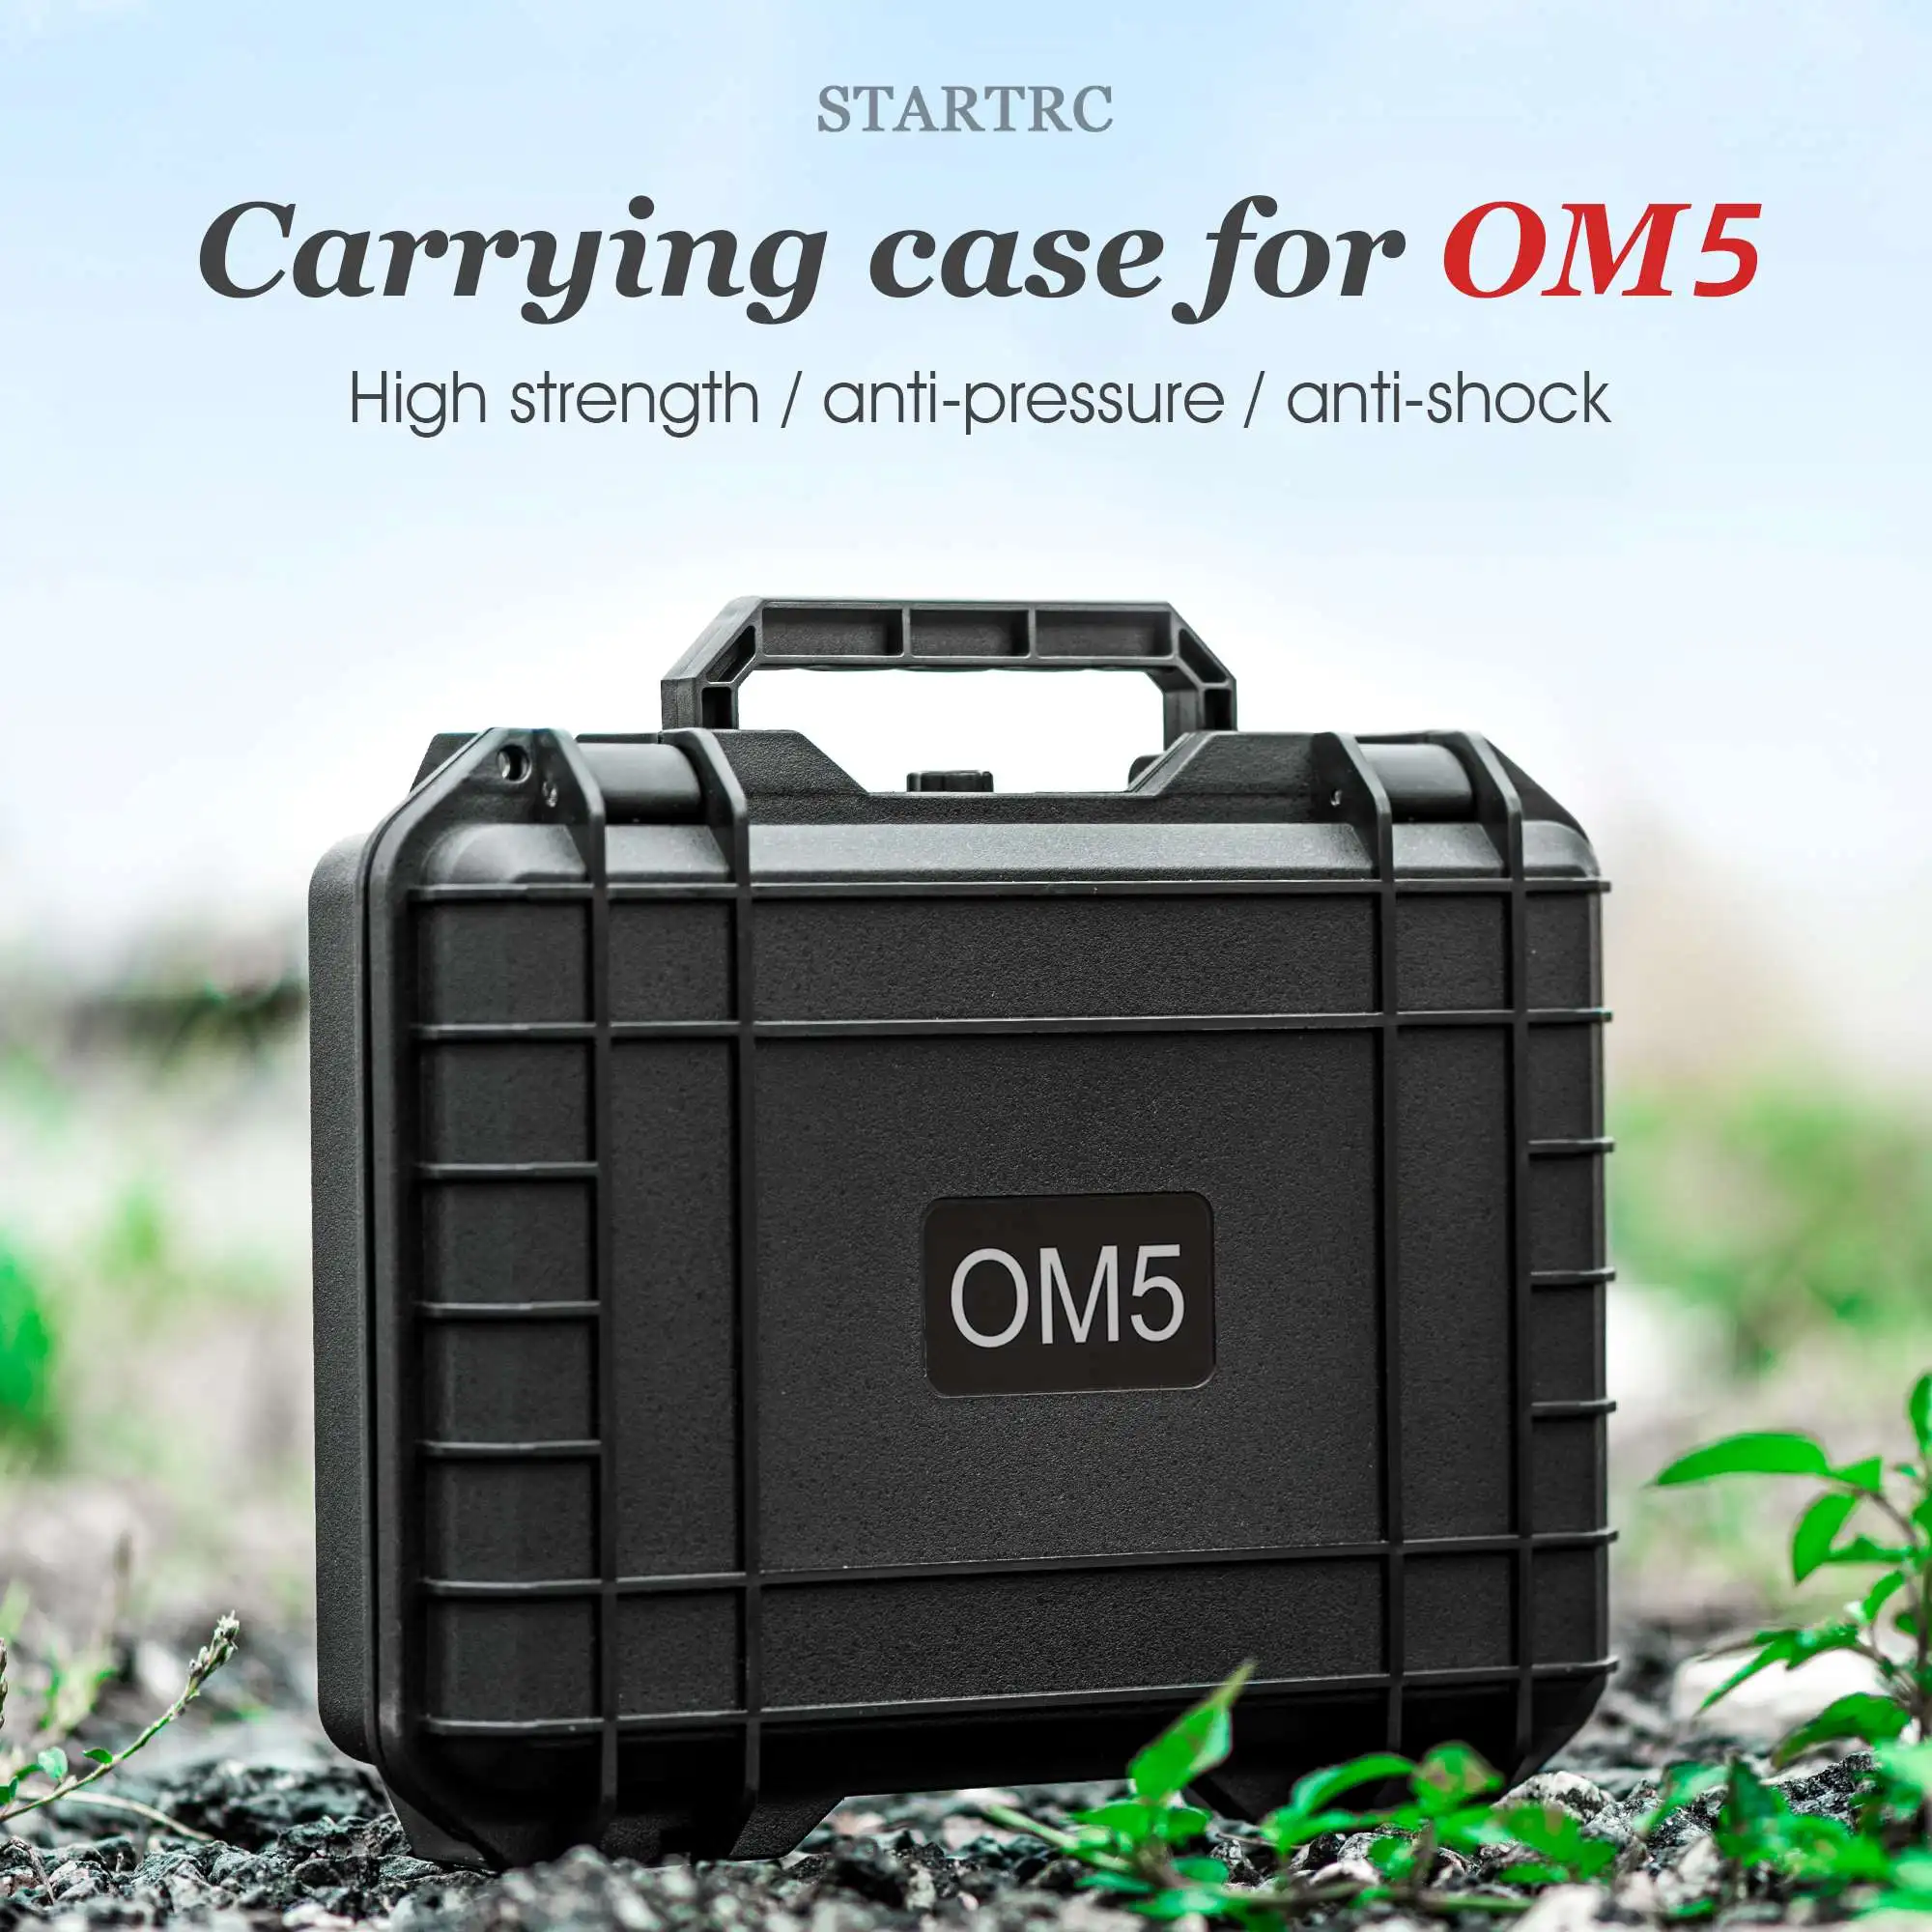 

DJI OM 5 Portable Carrying Case Waterproof Explosion-proof Storage Box for DJI Osmo Mobile 5 Handheld Gimbal Accessories Bag